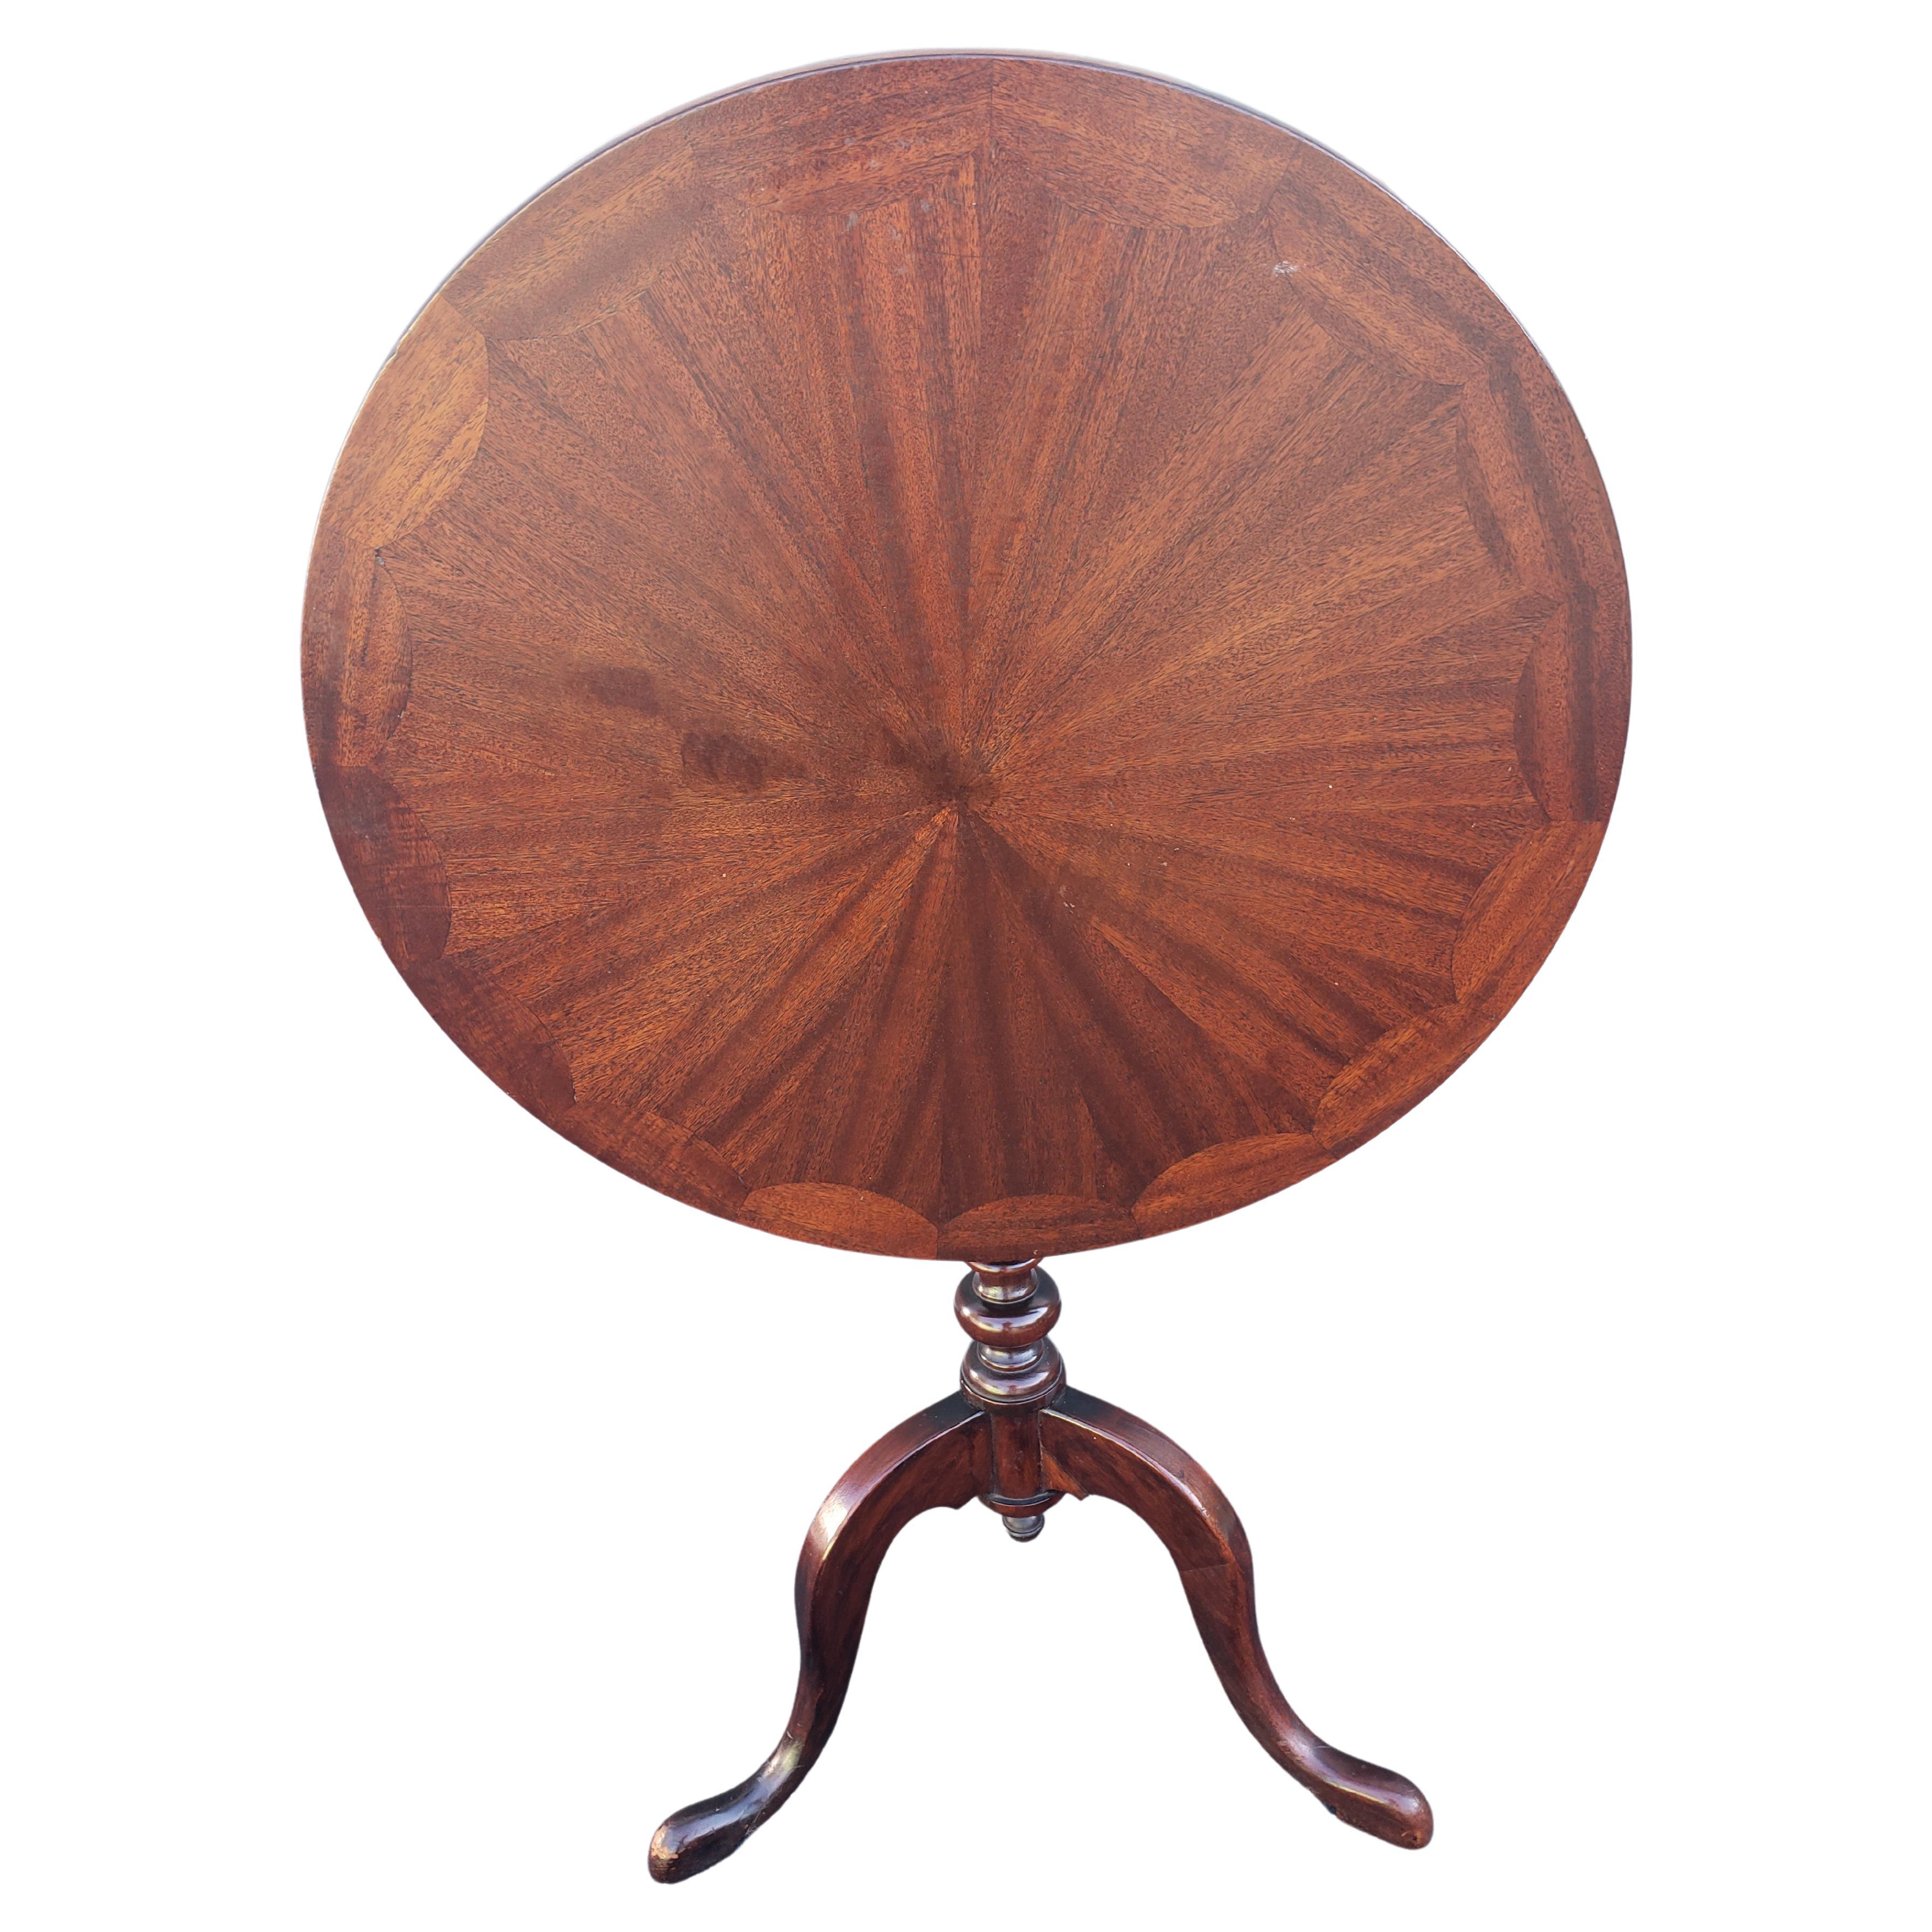 English Mahogany One Board Parquetry Tilt-Top Tea Table Desert Table, C. 1860s For Sale 1